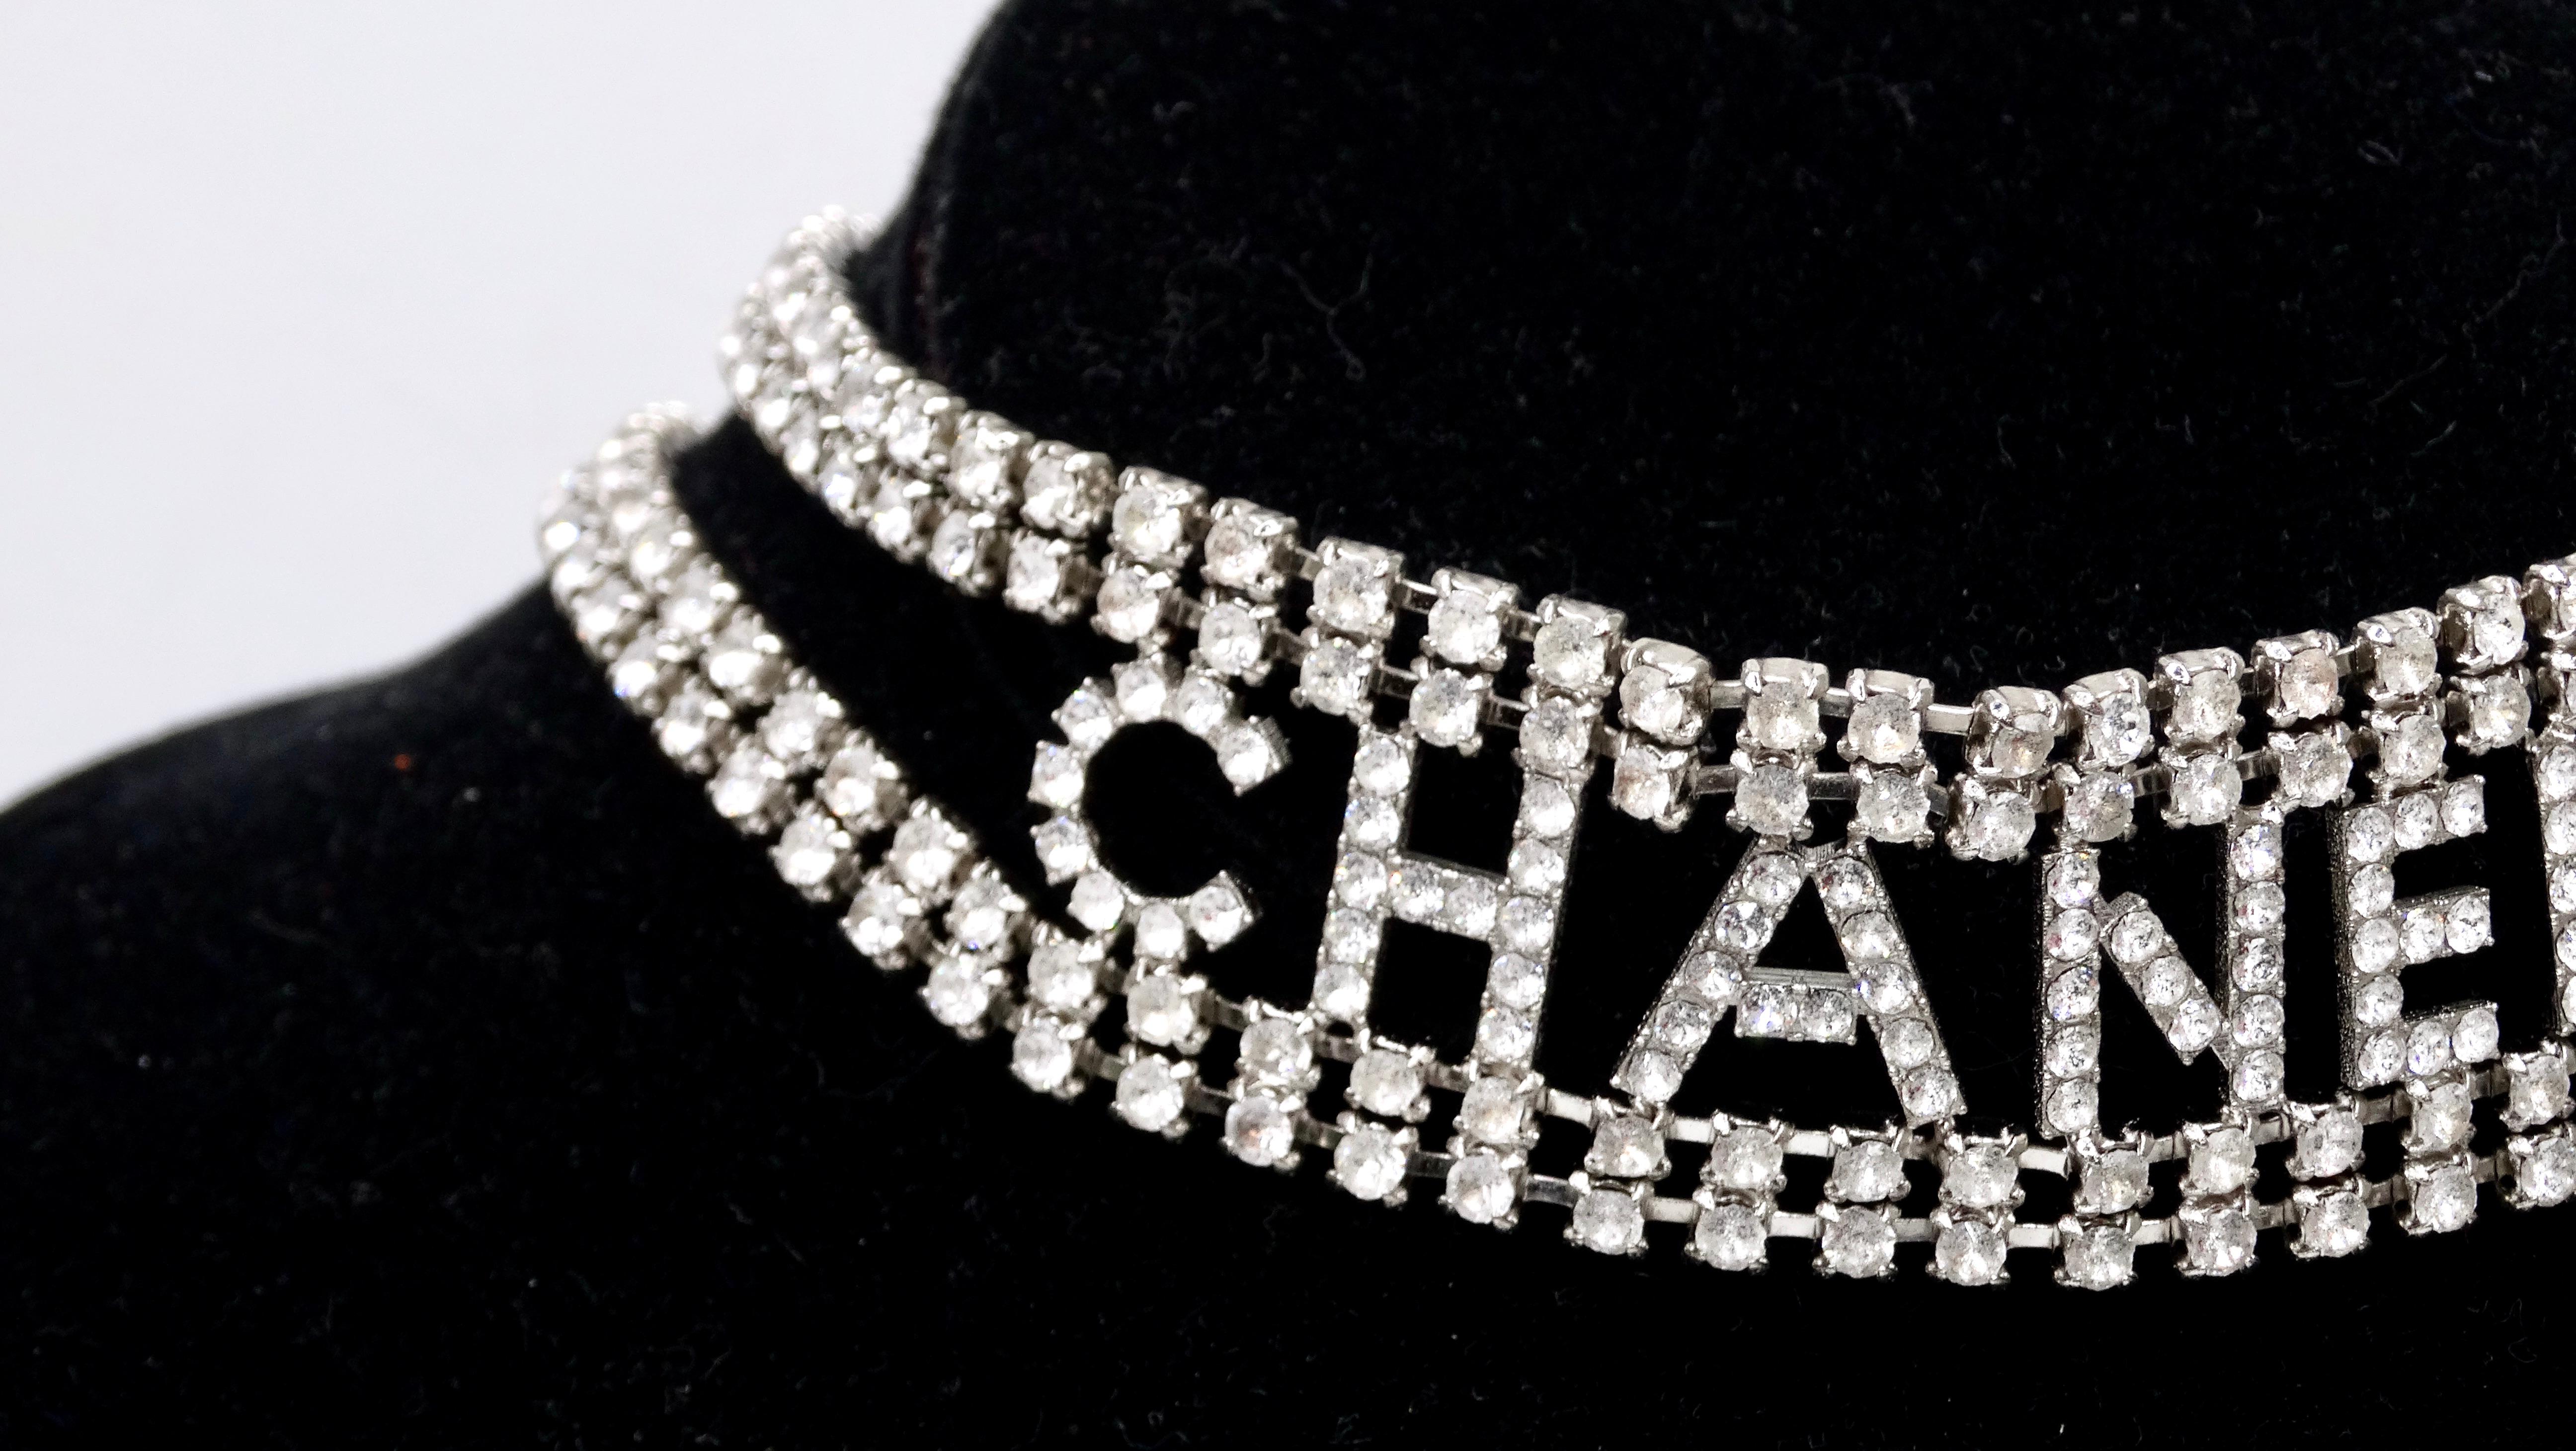 Get your piece of ultra-rare Chanel here! This necklace is from a 2018 collection making this gem a contemporary piece with little to no wear. A no-brainer!! This is an authentic CHANEL Crystal CC Logo Choker Necklace is featured in silver and gives